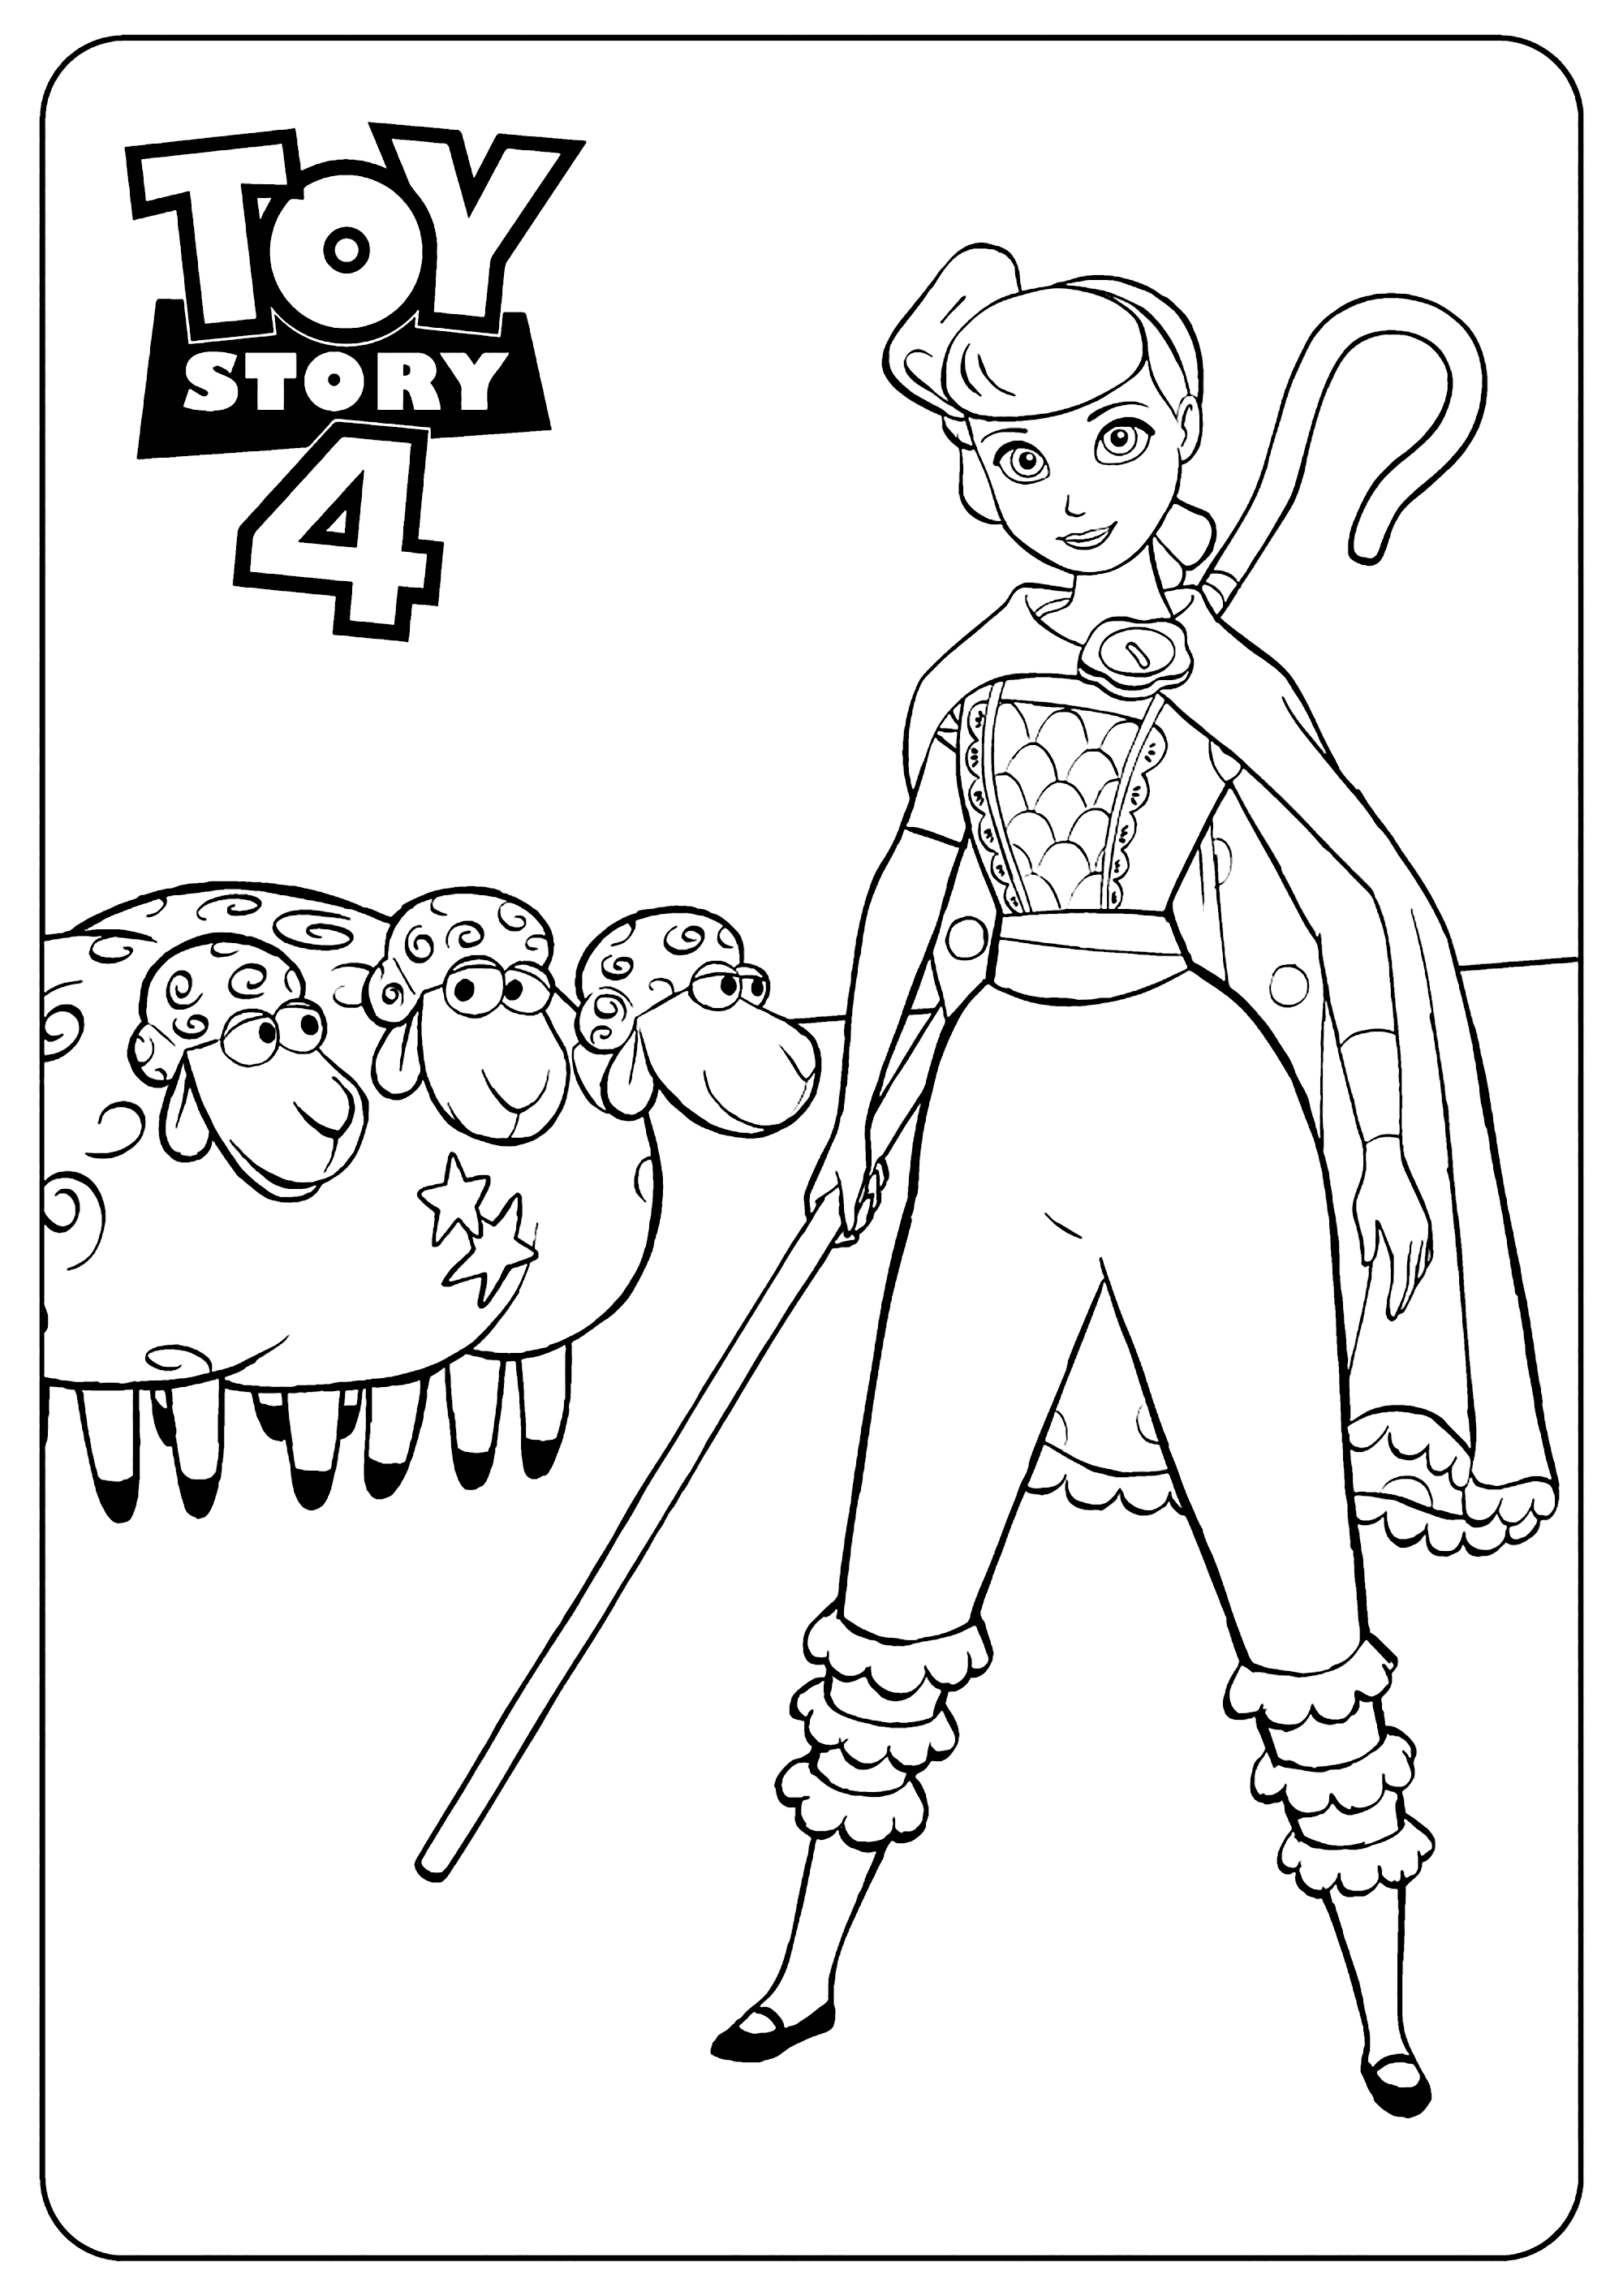 bo-peep-toy-story-4-coloring-page-toy-story-4-kids-coloring-pages